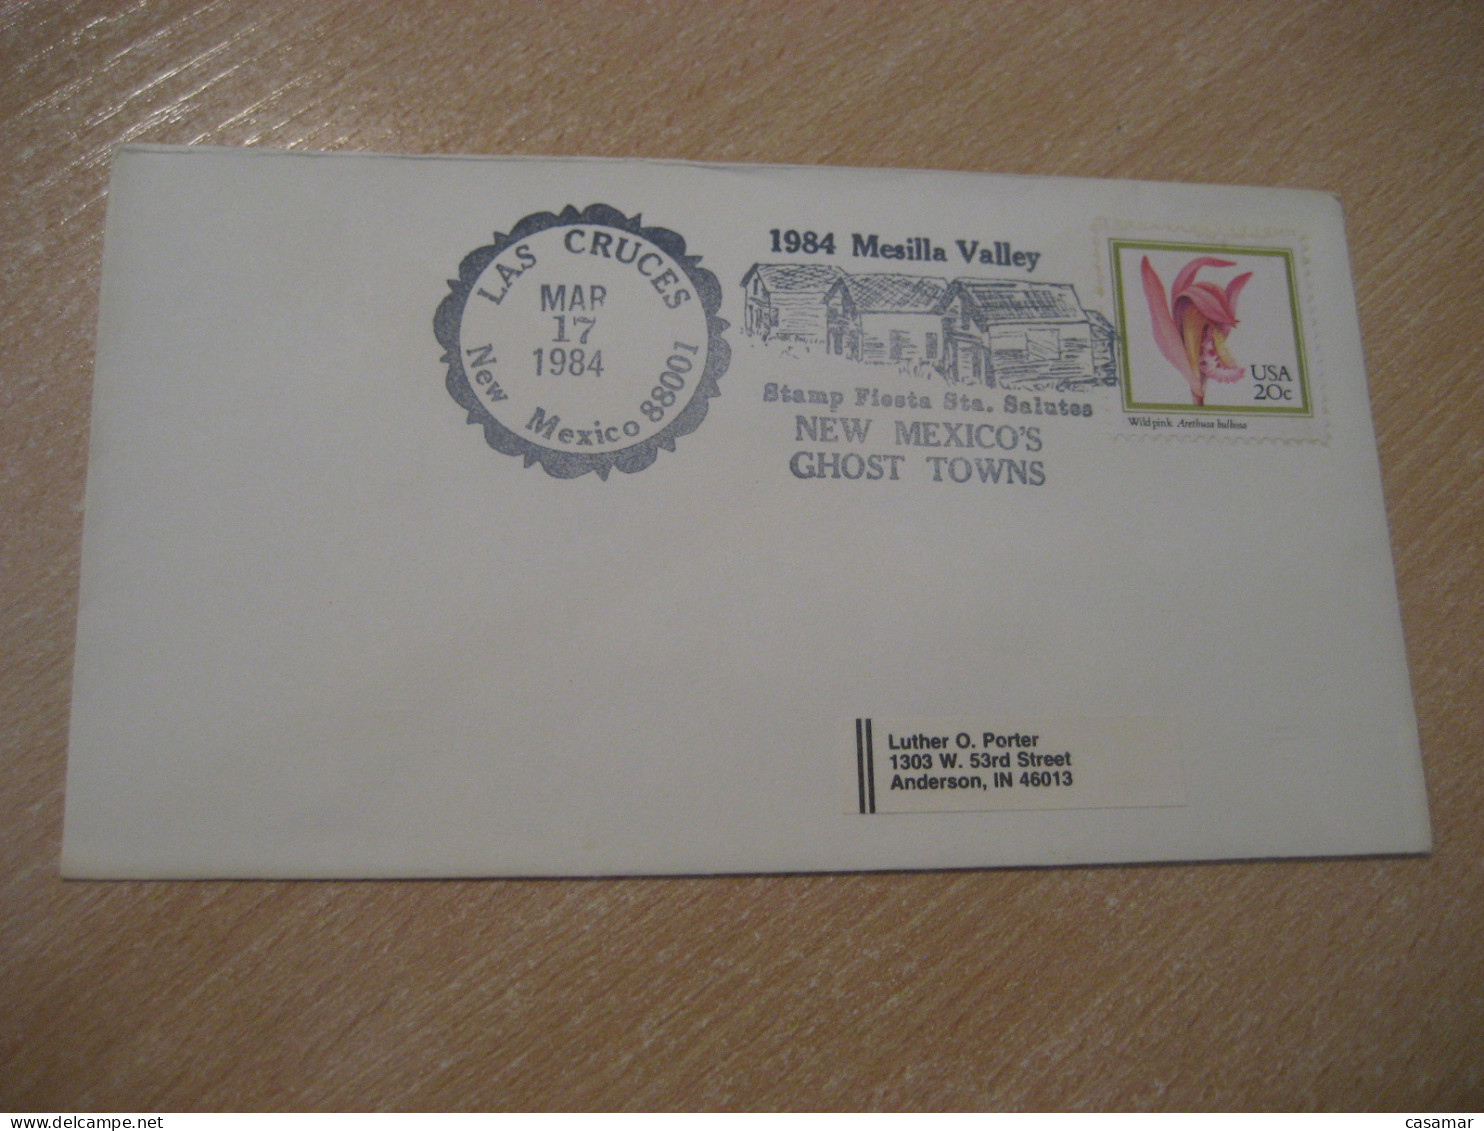 LAS CRUCES 1984 Mesilla Valley New Mexico Ghost Towns American Indians Indian Cancel Cover USA Indigenous Native History - Indianer